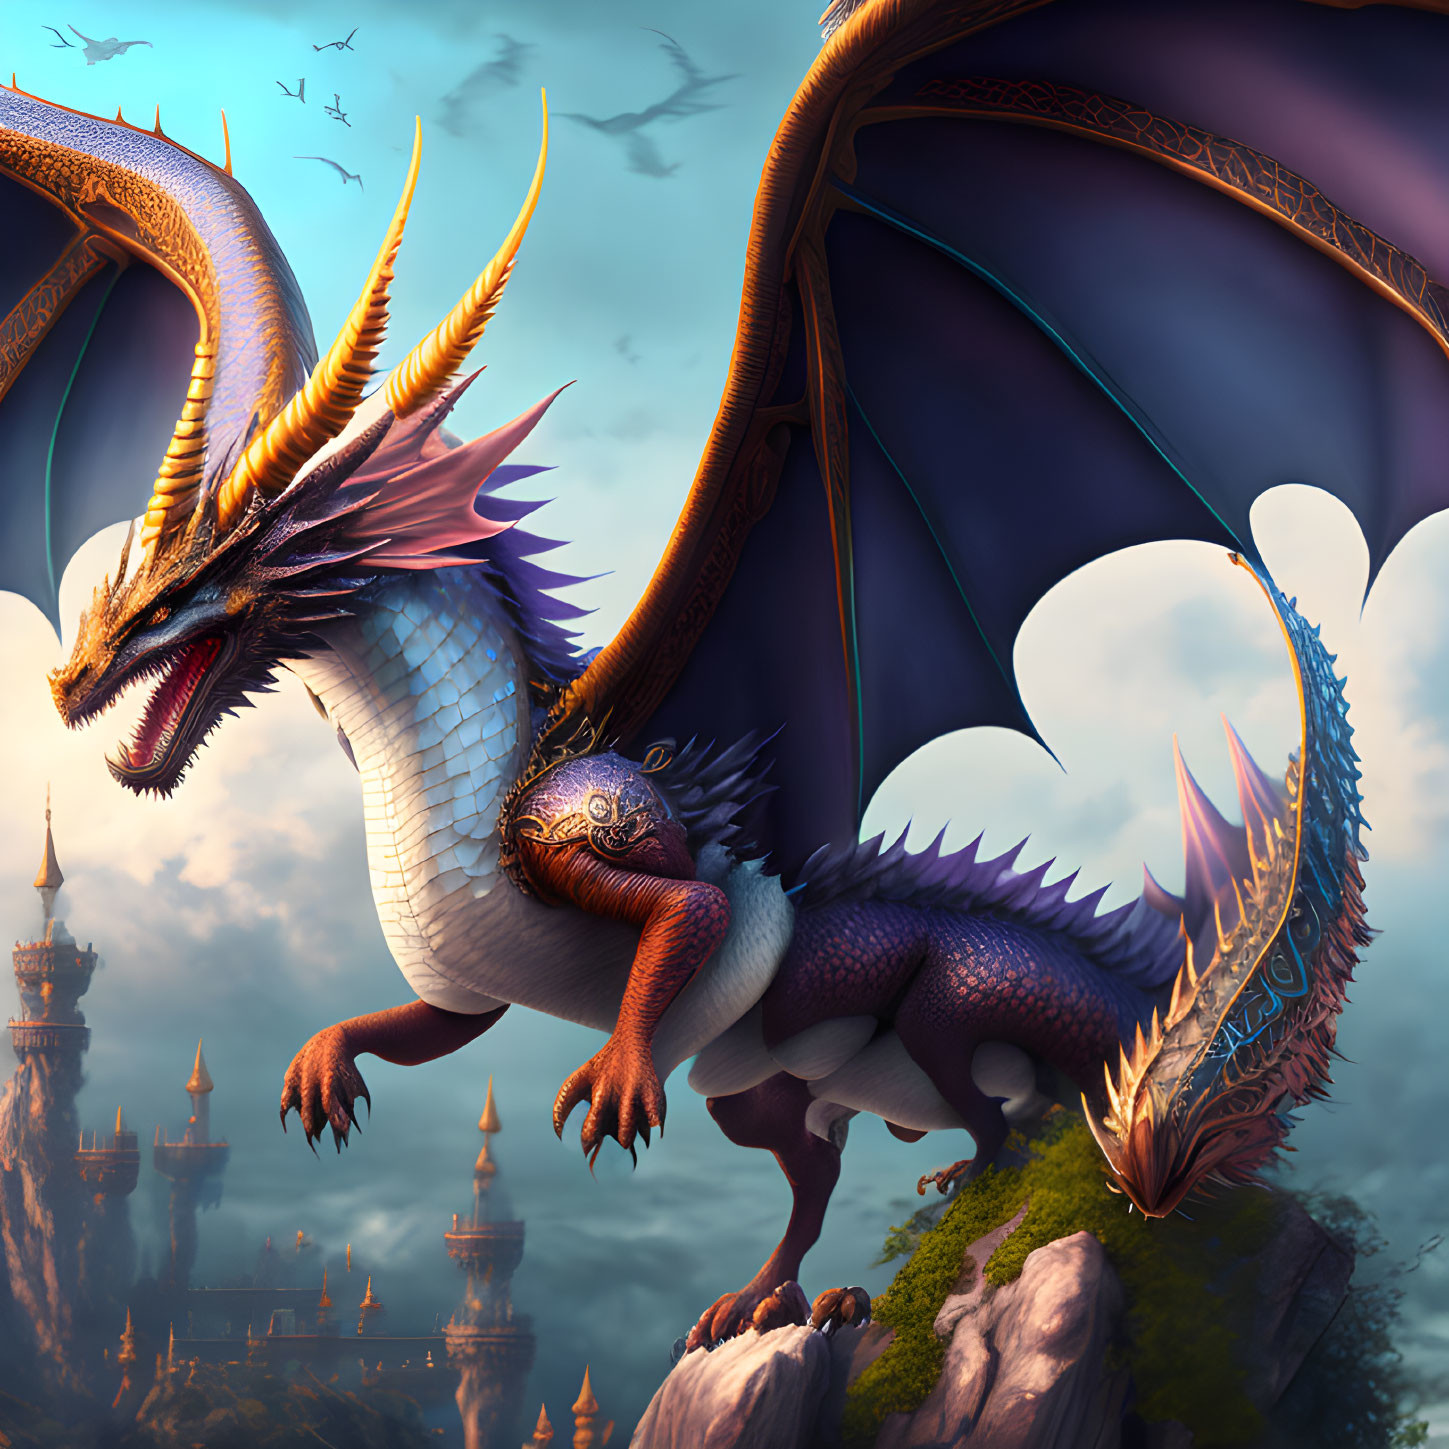 Orange and purple-scaled dragon on cliff with fantasy castle and twilight sky